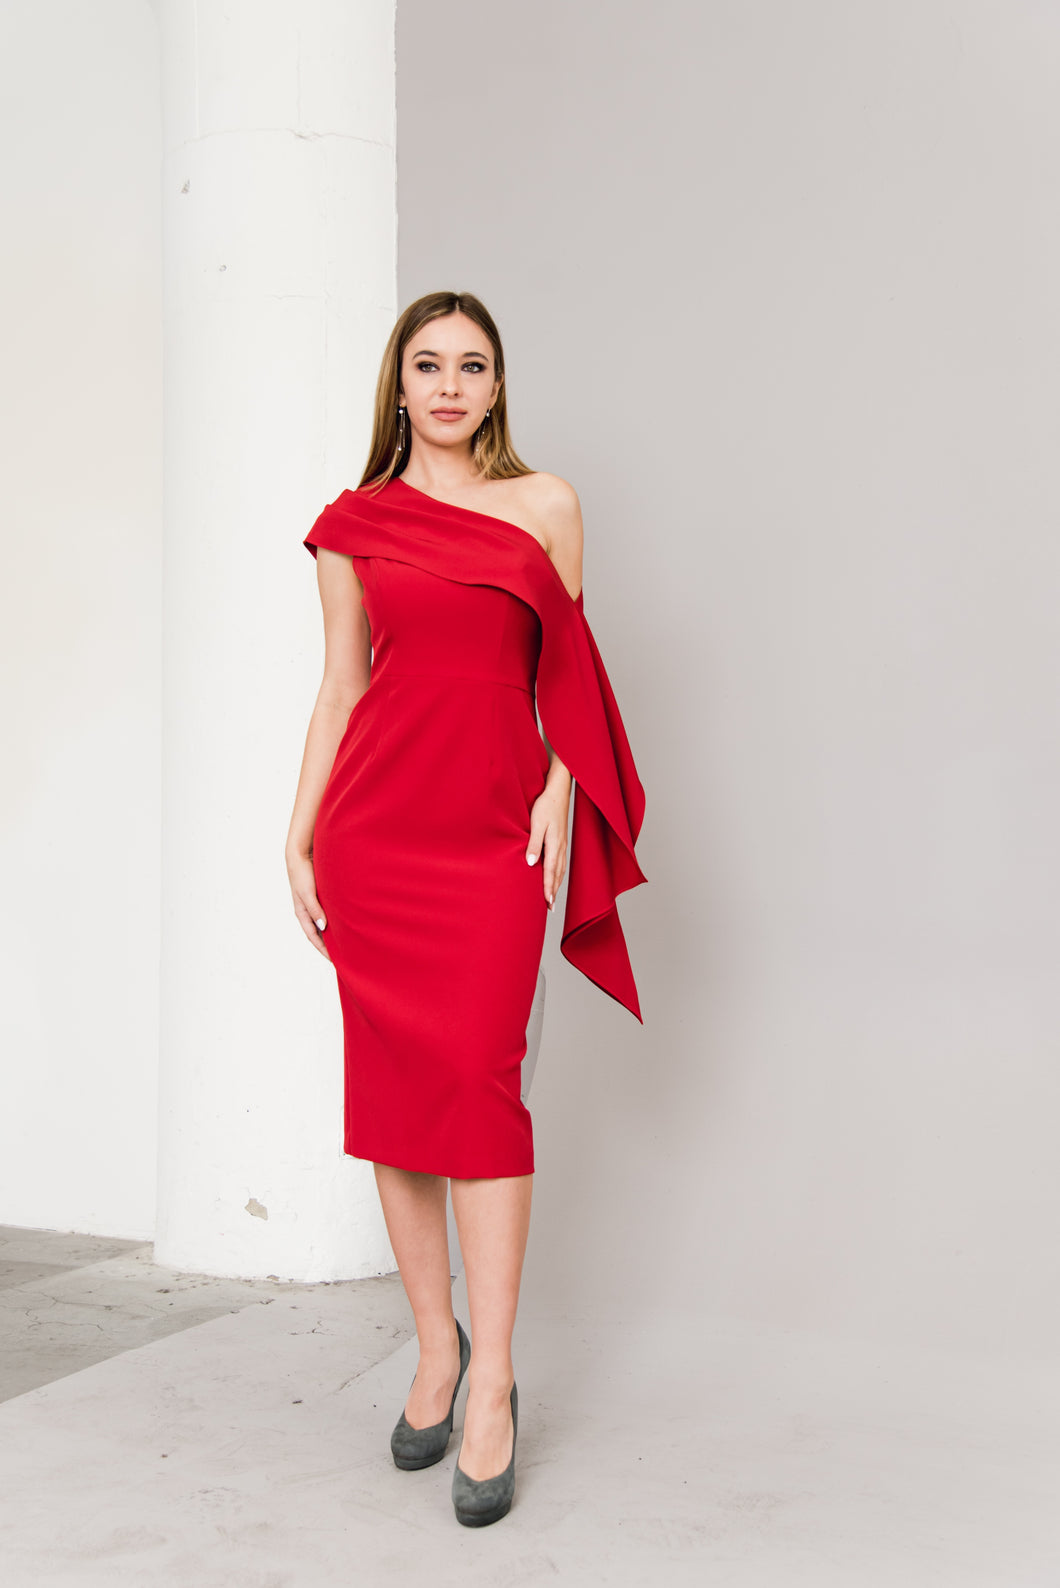 Red Delilah Cocktail Dress by Posh Couture: one shoulder overlay, bold color - perfect for risk-takers!